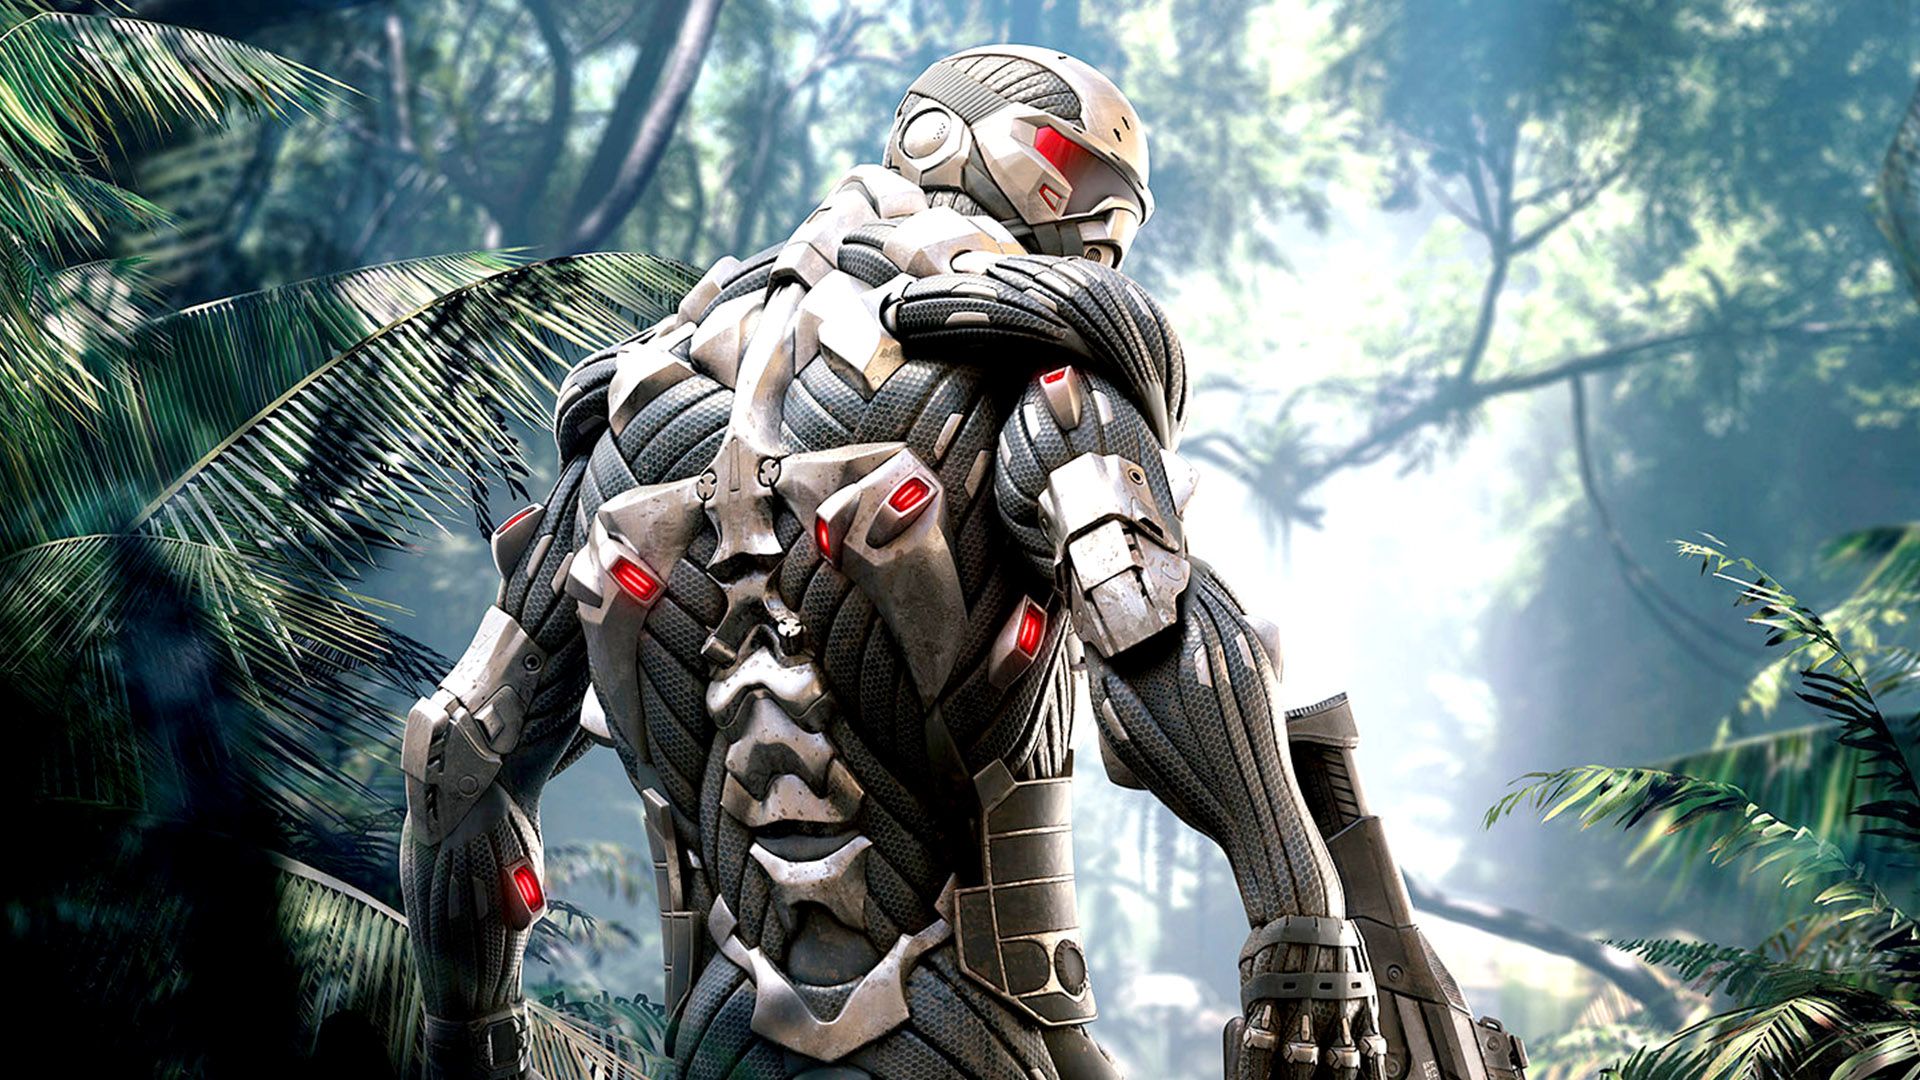 Crysis Remastered Trilogy Announced